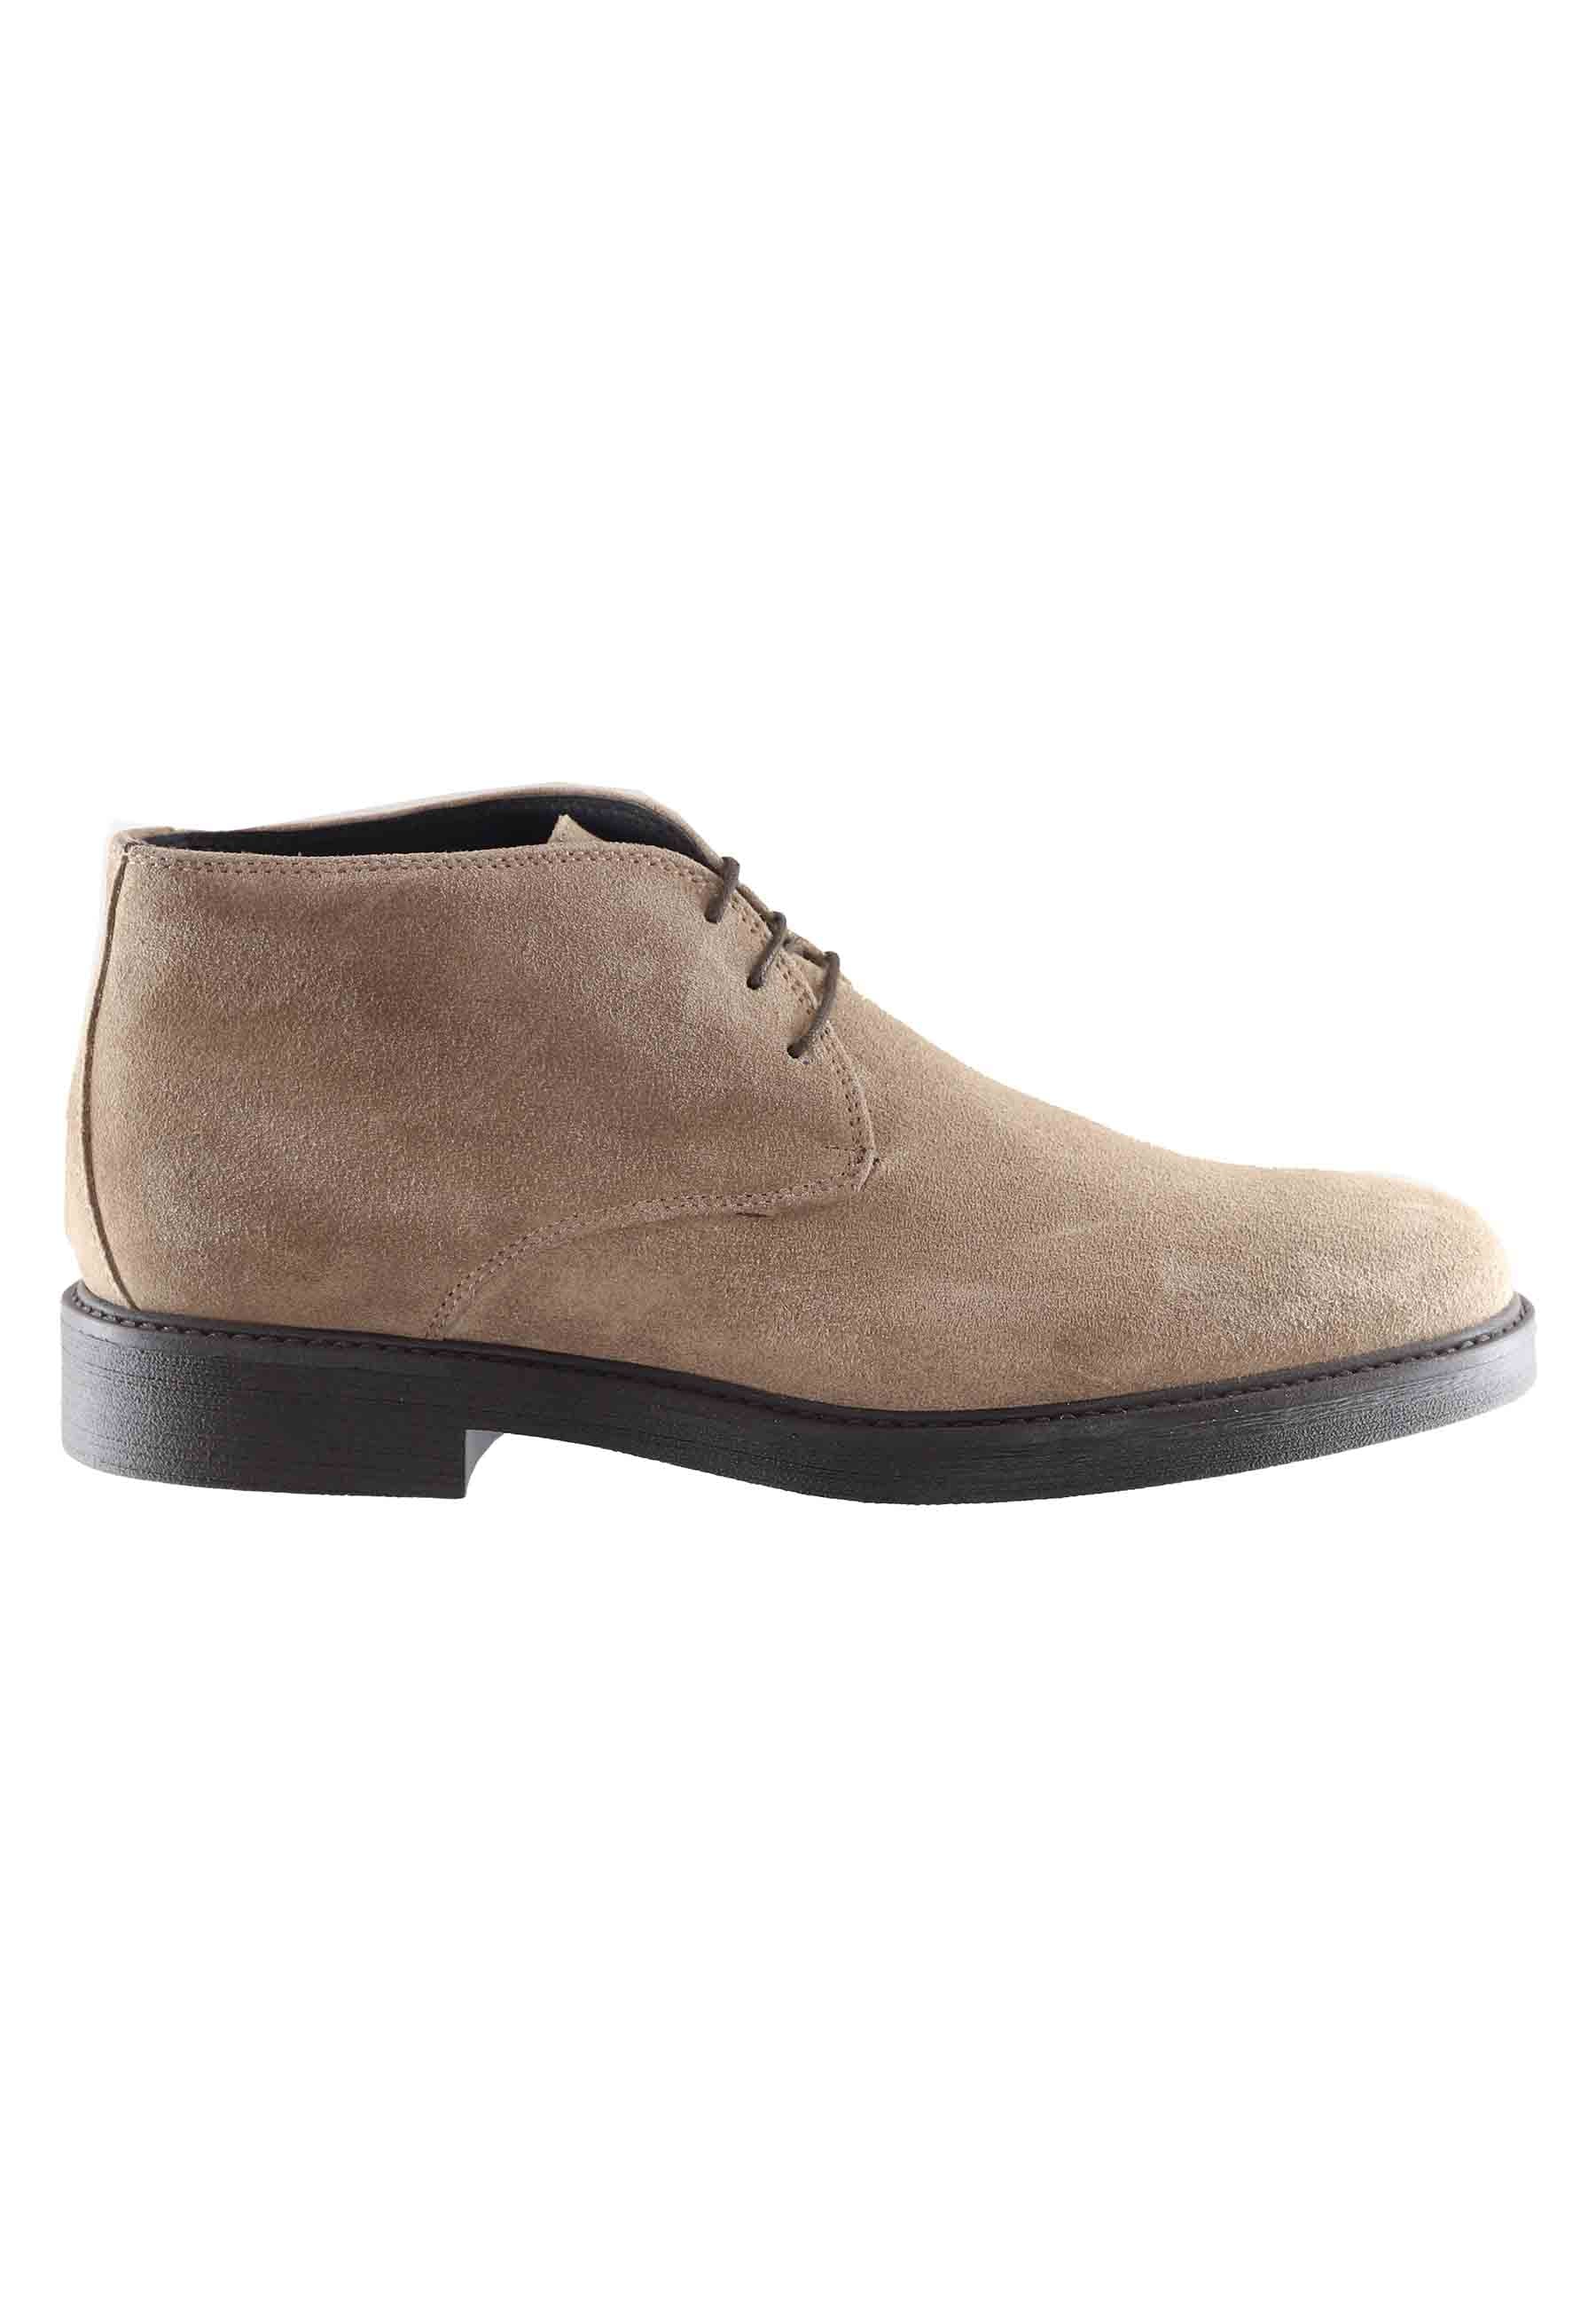 Men's ankle boots in taupe suede with rubber sole